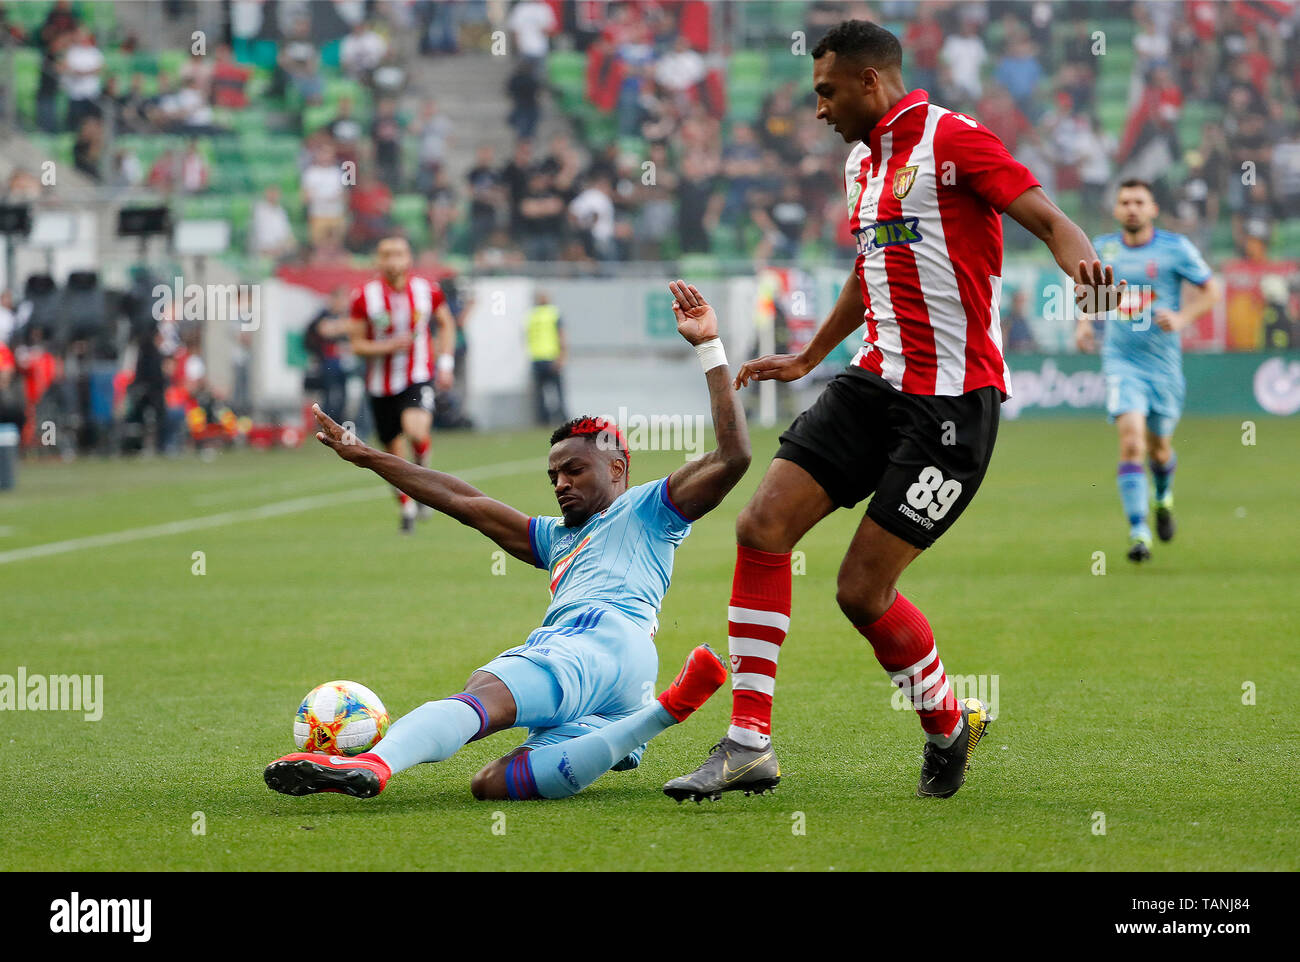 BUDAPEST, HUNGARY - MAY 25: (l-r) Stopira of MOL Vidi FC slide tackles  David N'Gog of Budapest Honved during the Hungarian Cup Final match between  Budapest Honved and MOL Vidi FC at